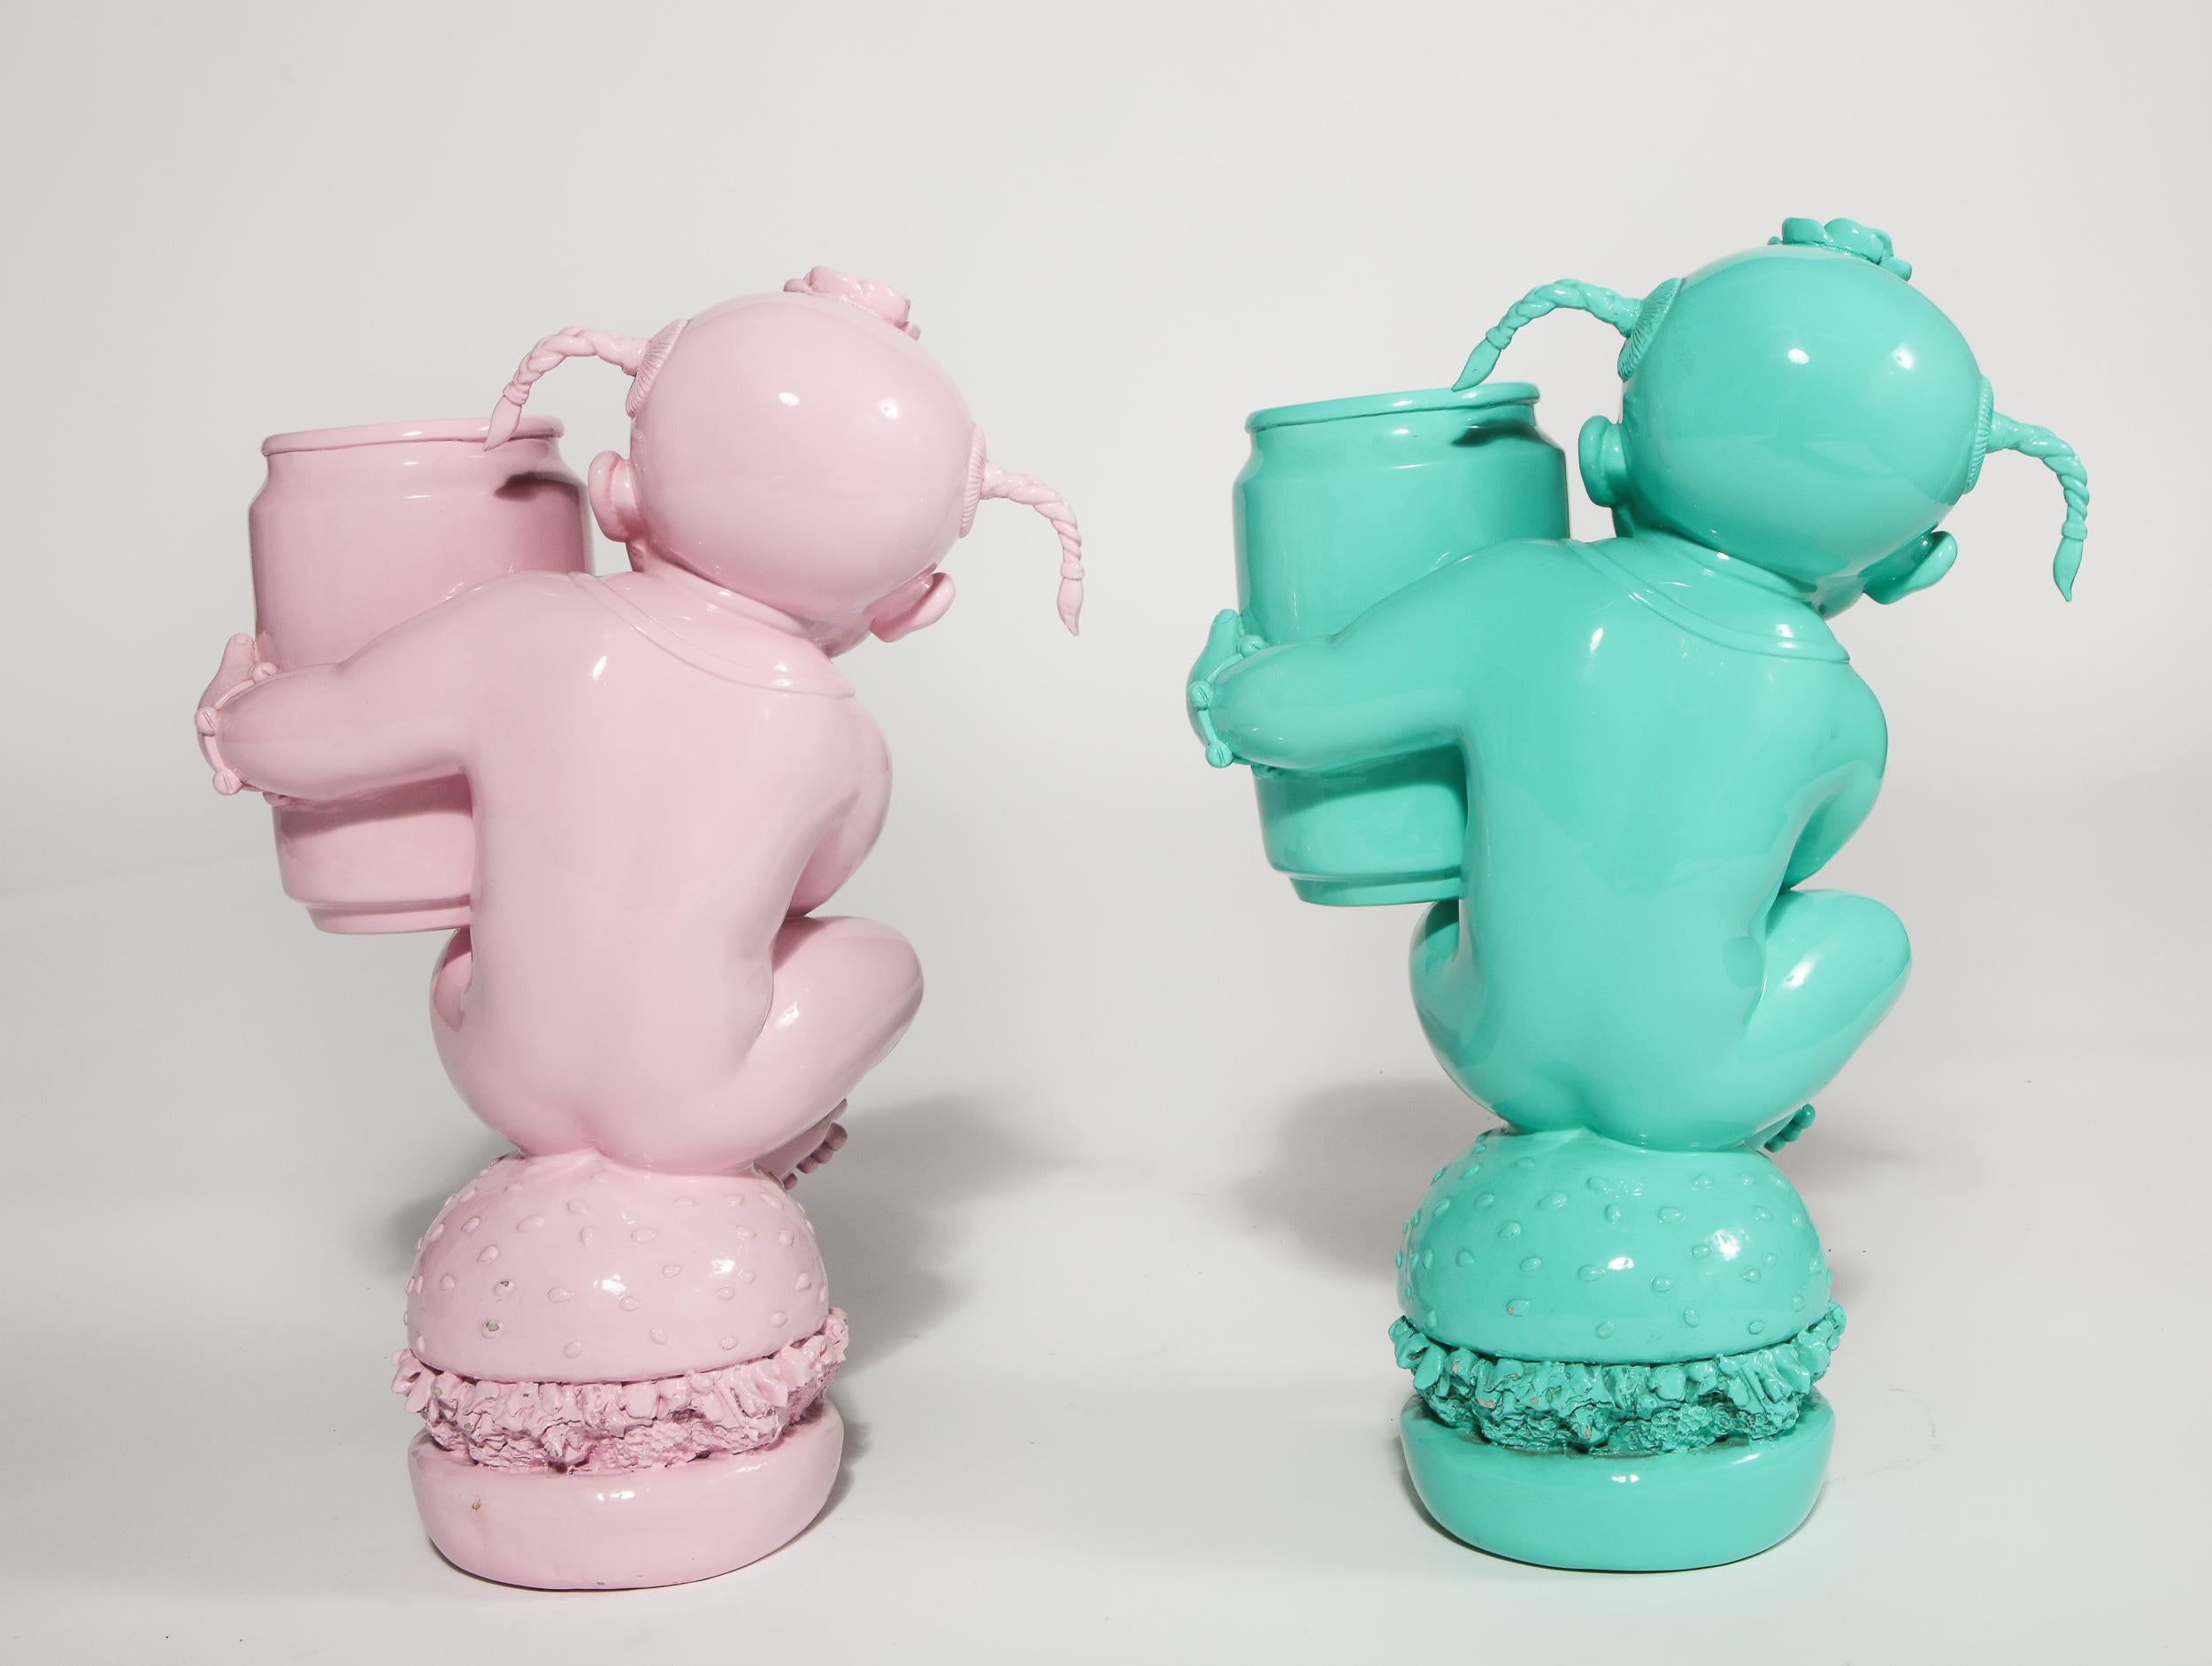 Contemporary Luo Brothers Chinese Lacquer Sculptures, Pink and Turquoise, Pair